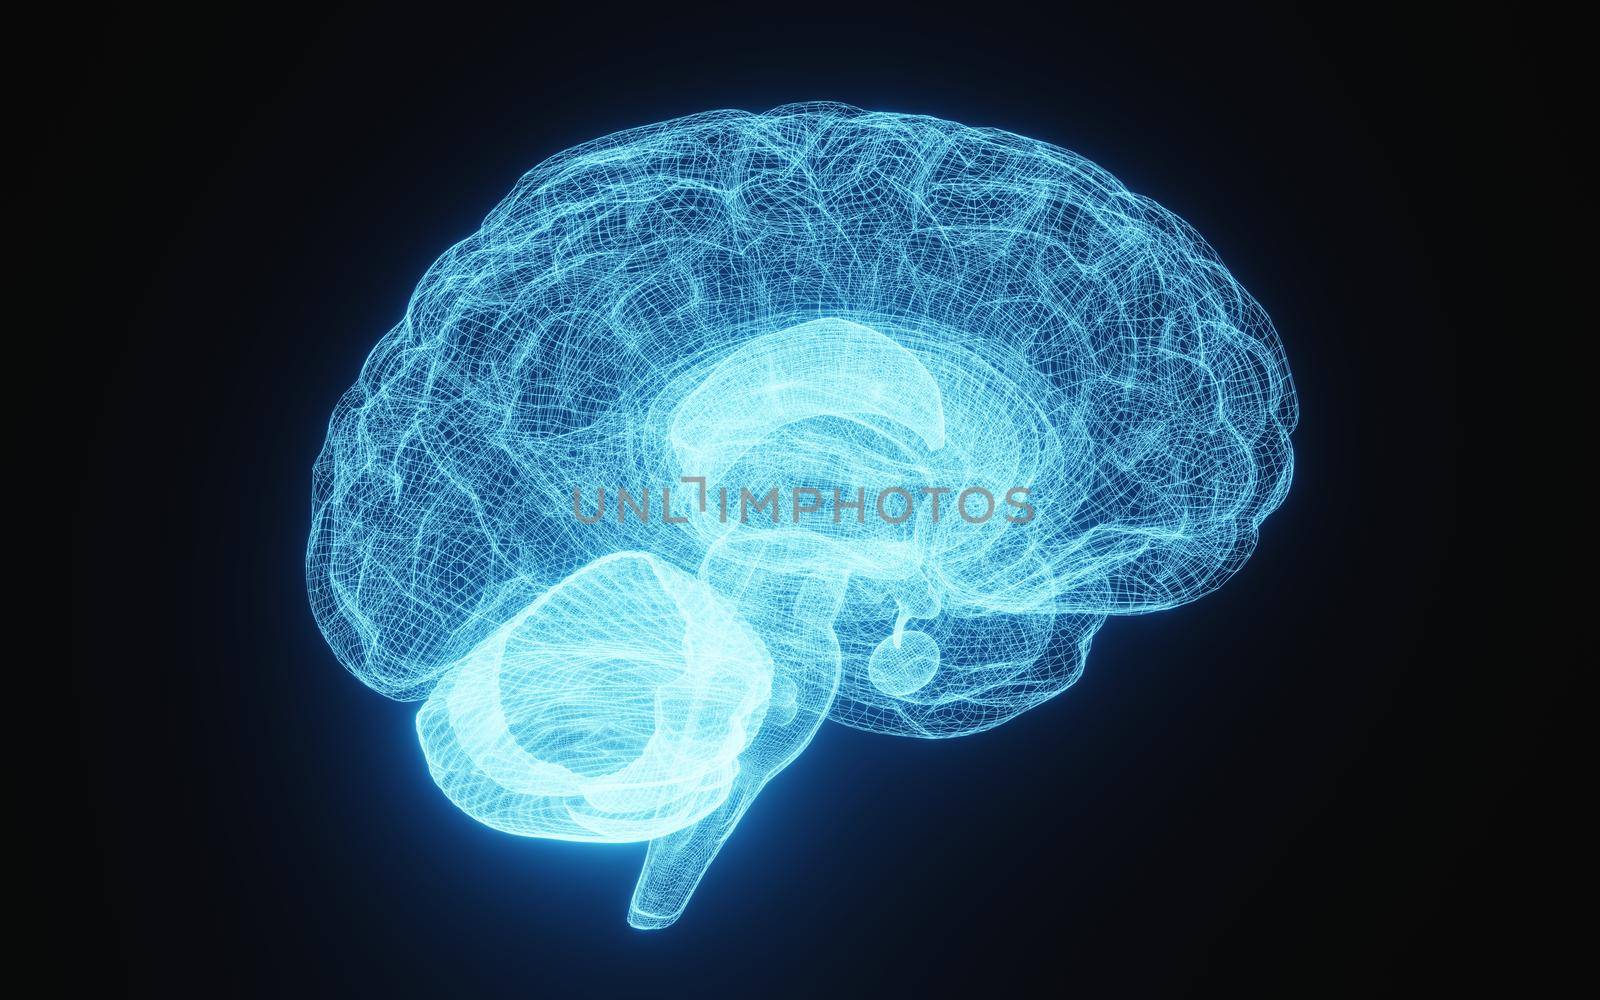 Glowing X-ray image of human brain in blue wireframe on isolated black background. Science and medical concept. Side of brain. 3D illustration rendering by MiniStocker